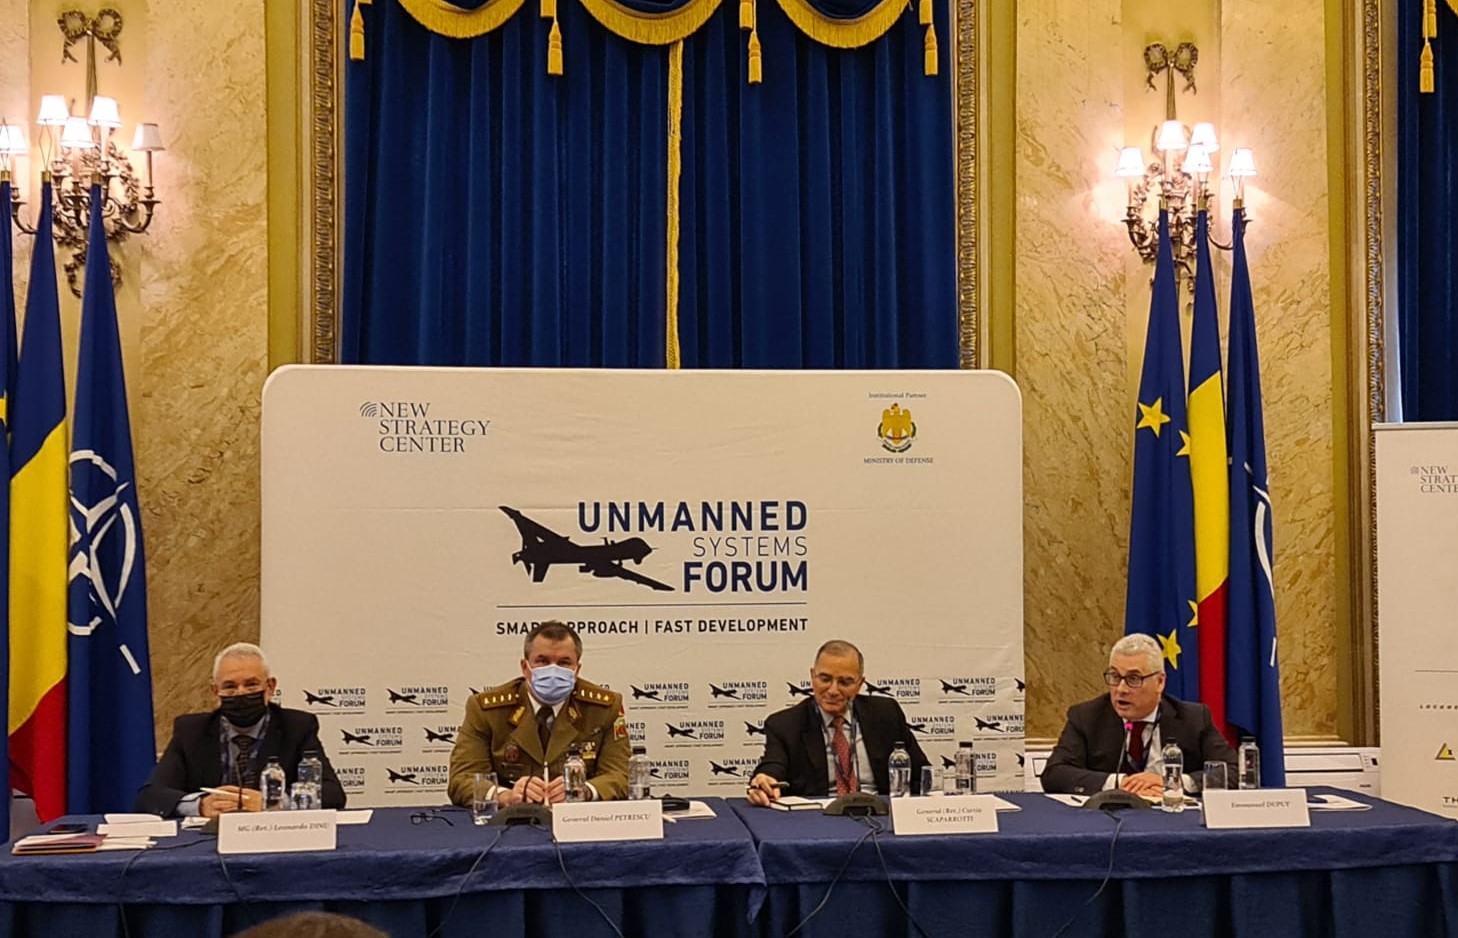 Unmanned Systems Forum. Smart Approach, Fast Development – Day I